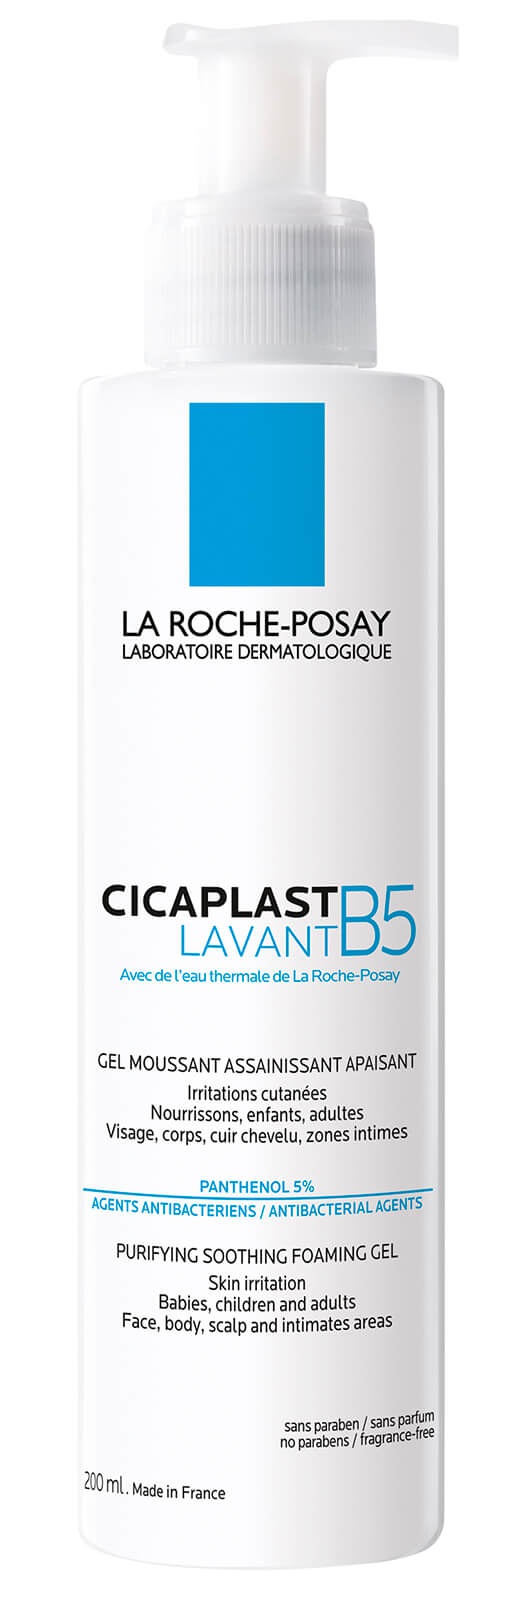 La Roche-Posay Cicaplast B5 Anti-Bacterial Cleansing Wash